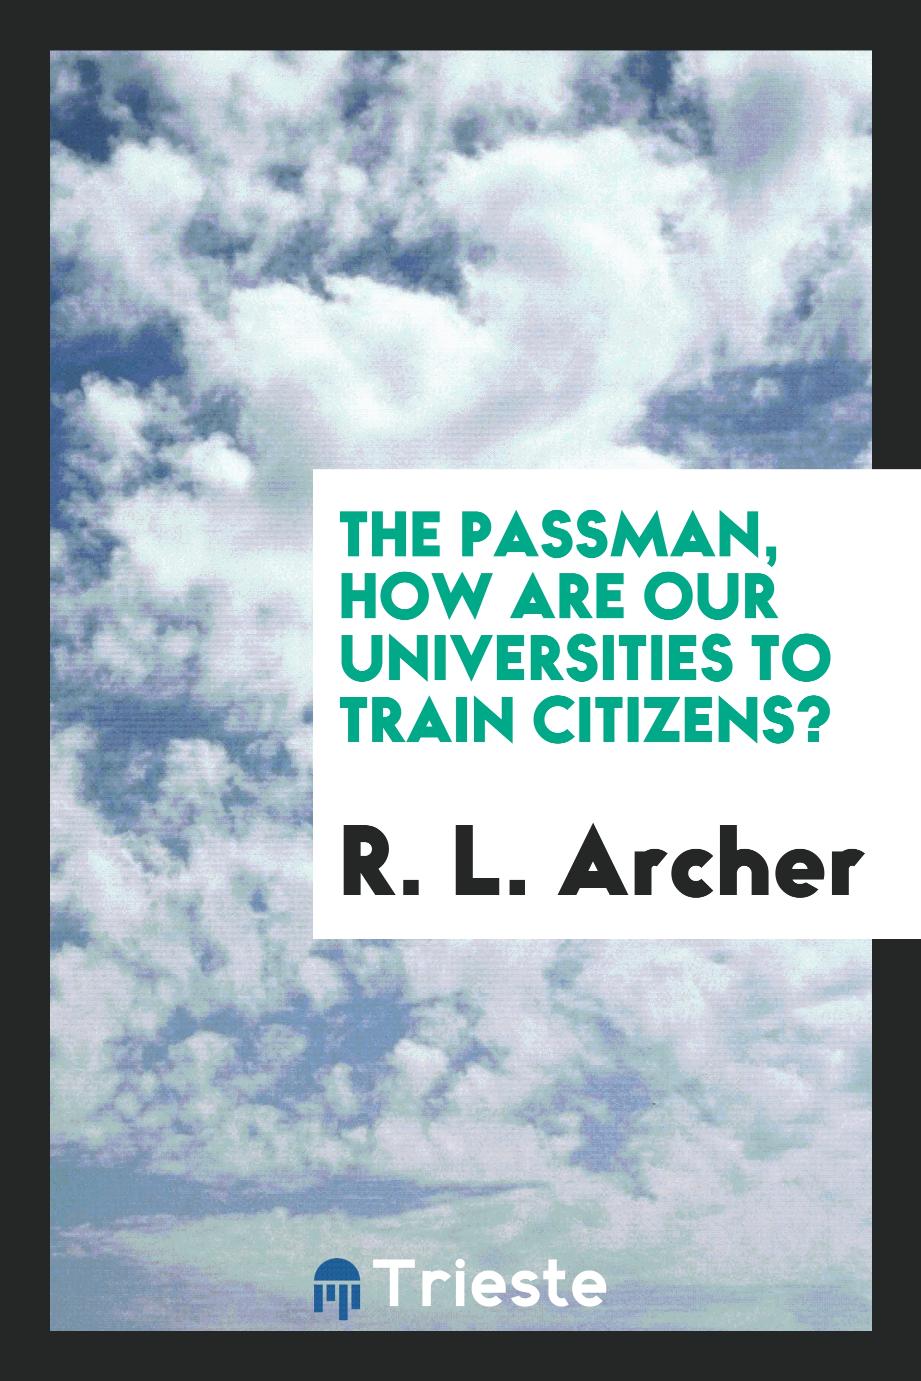 The passman, how are our universities to train citizens?